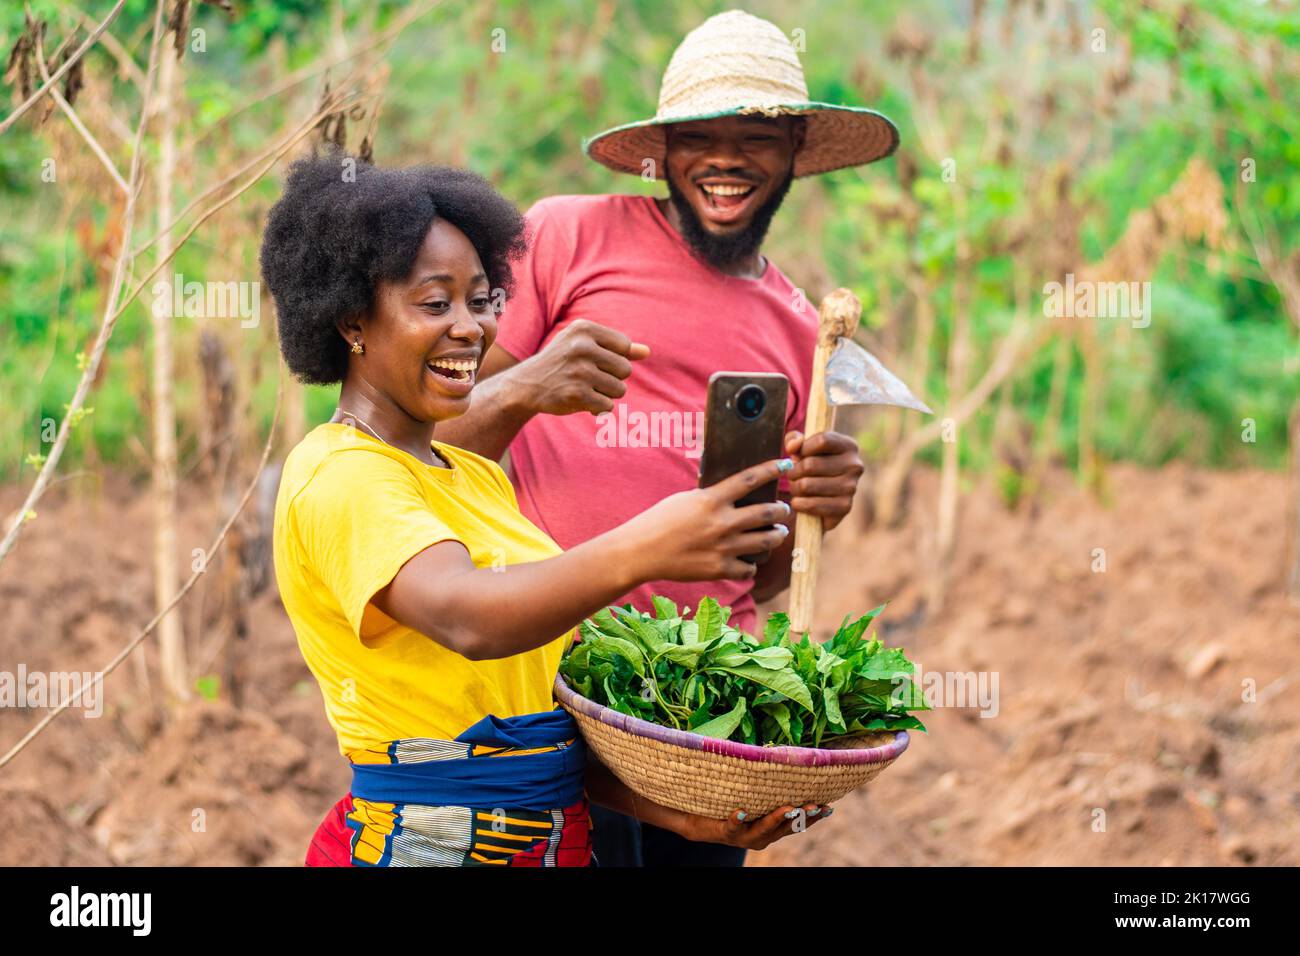 two african farmers excitedly looking at a phone Stock Photo